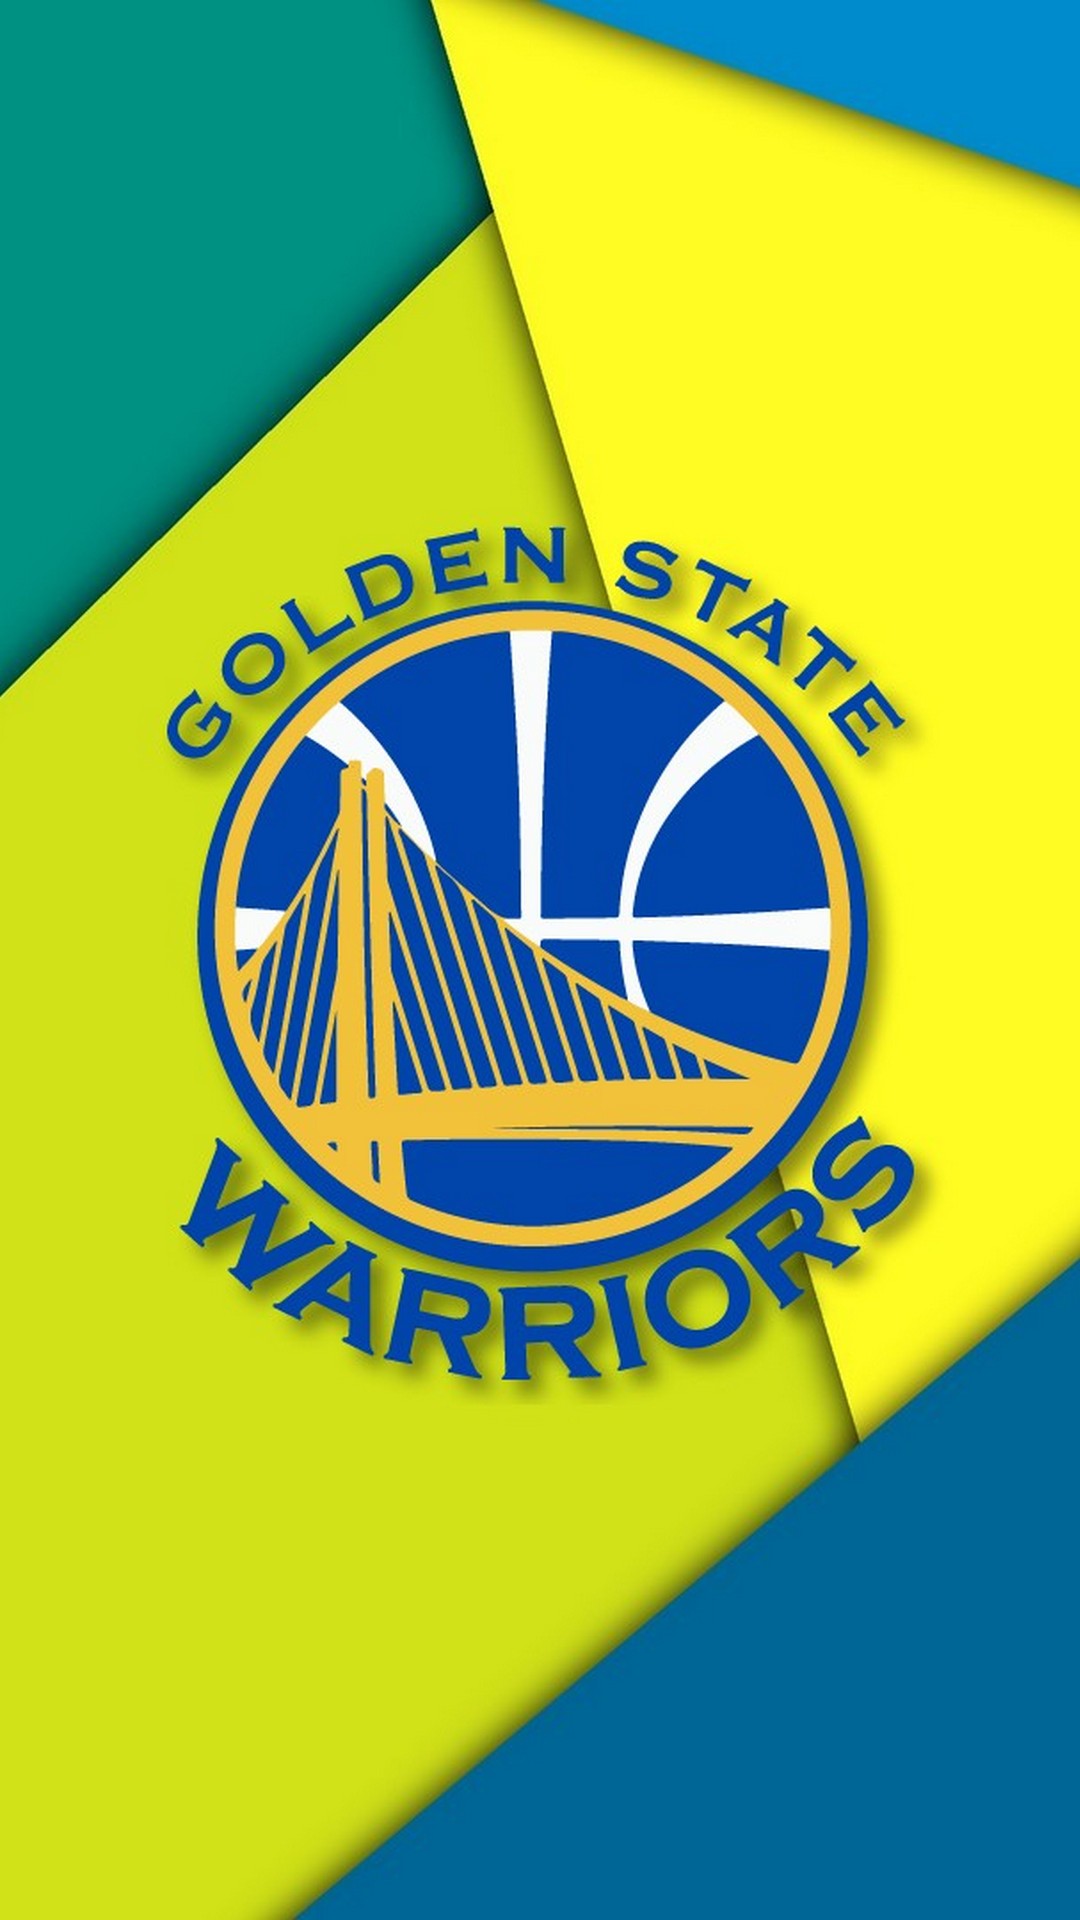 iPhone Wallpaper Golden State Warriors with image resolution 1080x1920 pixel. You can make this wallpaper for your iPhone 5, 6, 7, 8, X backgrounds, Mobile Screensaver, or iPad Lock Screen